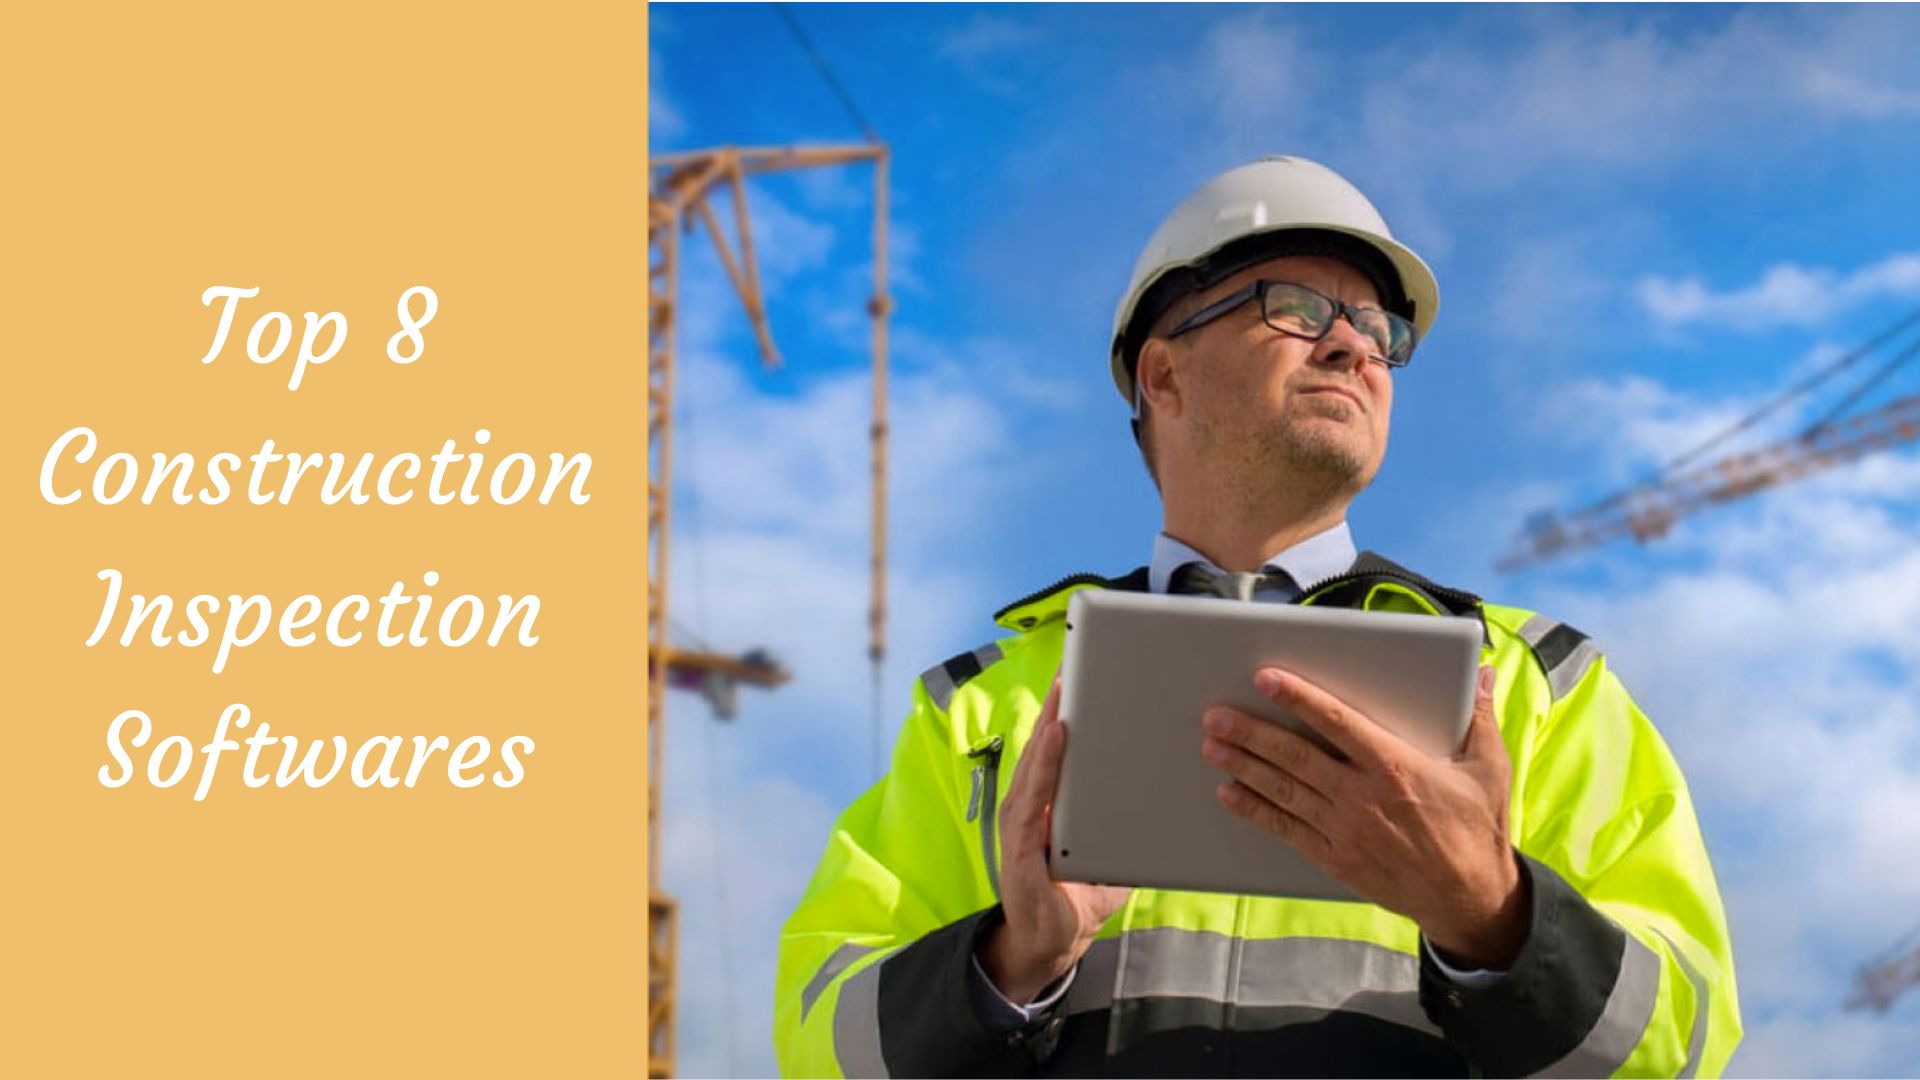 Top 8 Construction Inspection Softwares